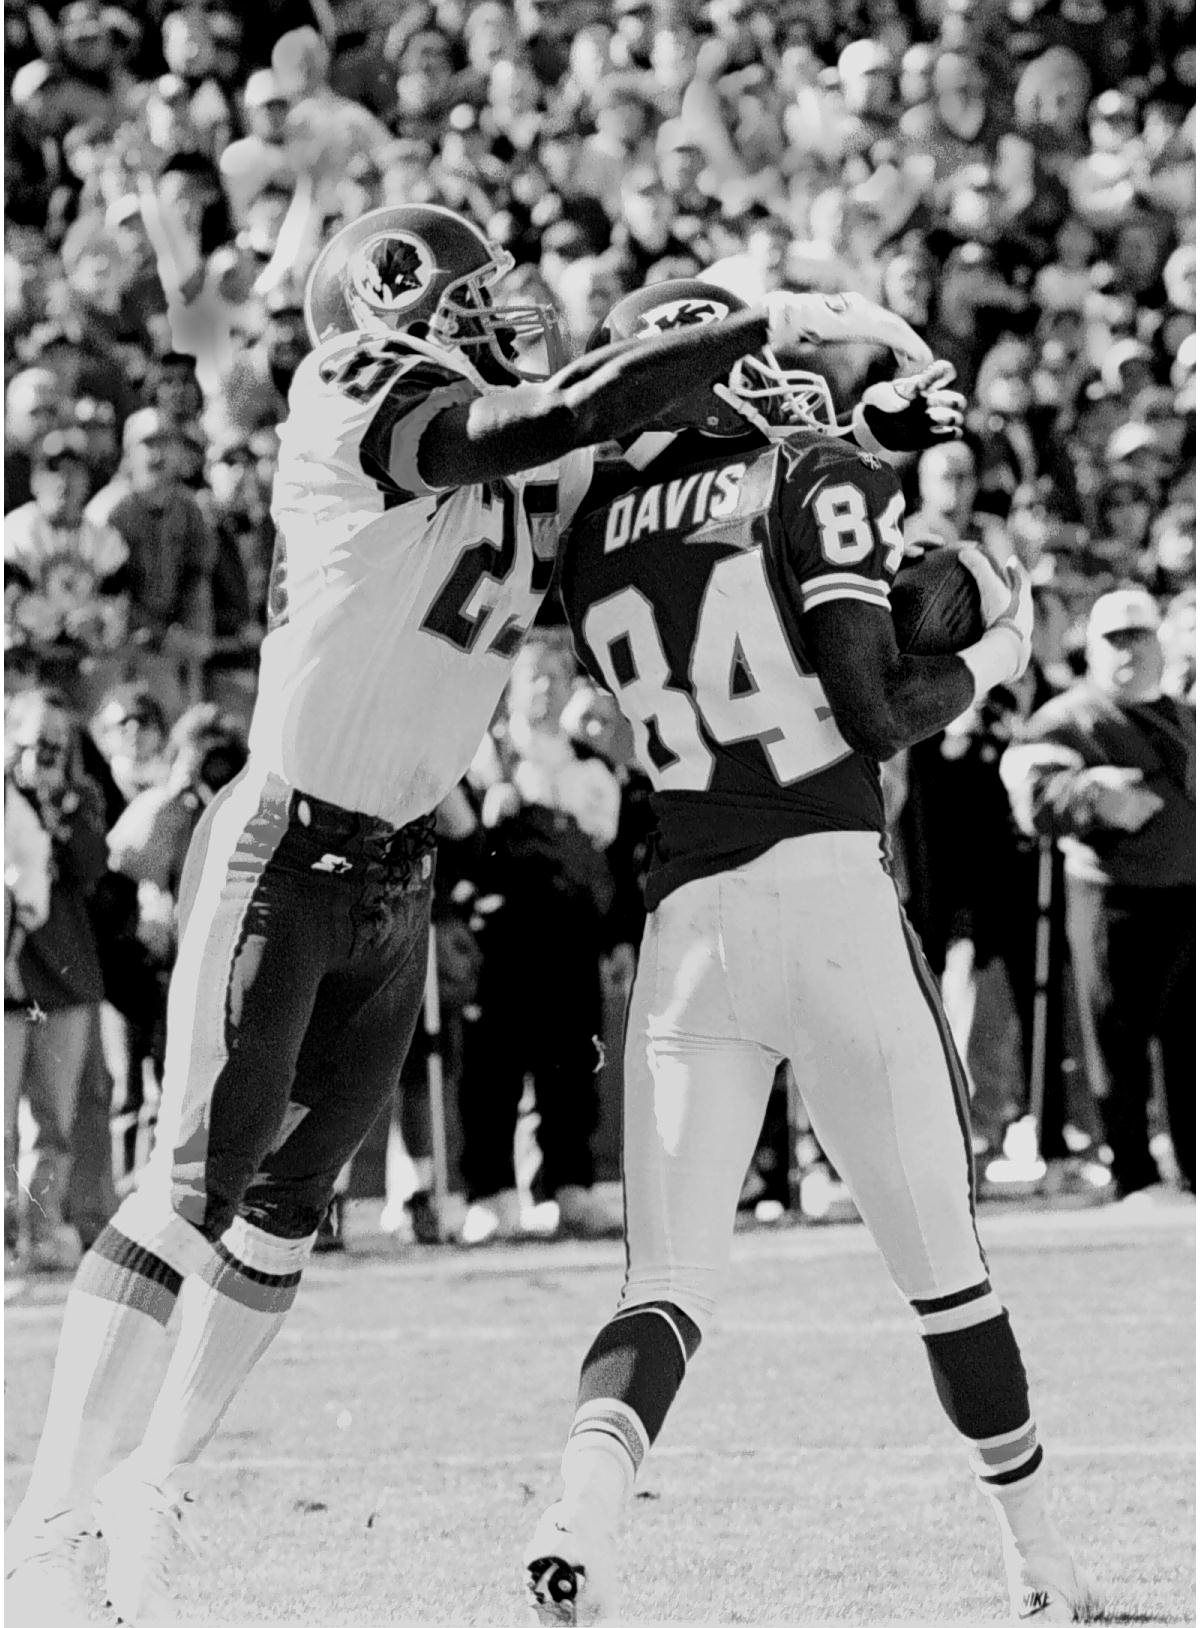 11/05/95 CHIEFS’ WILLIE DAVIS, right, CATCHES touchdown IN FRONT OF TOM CARTER.